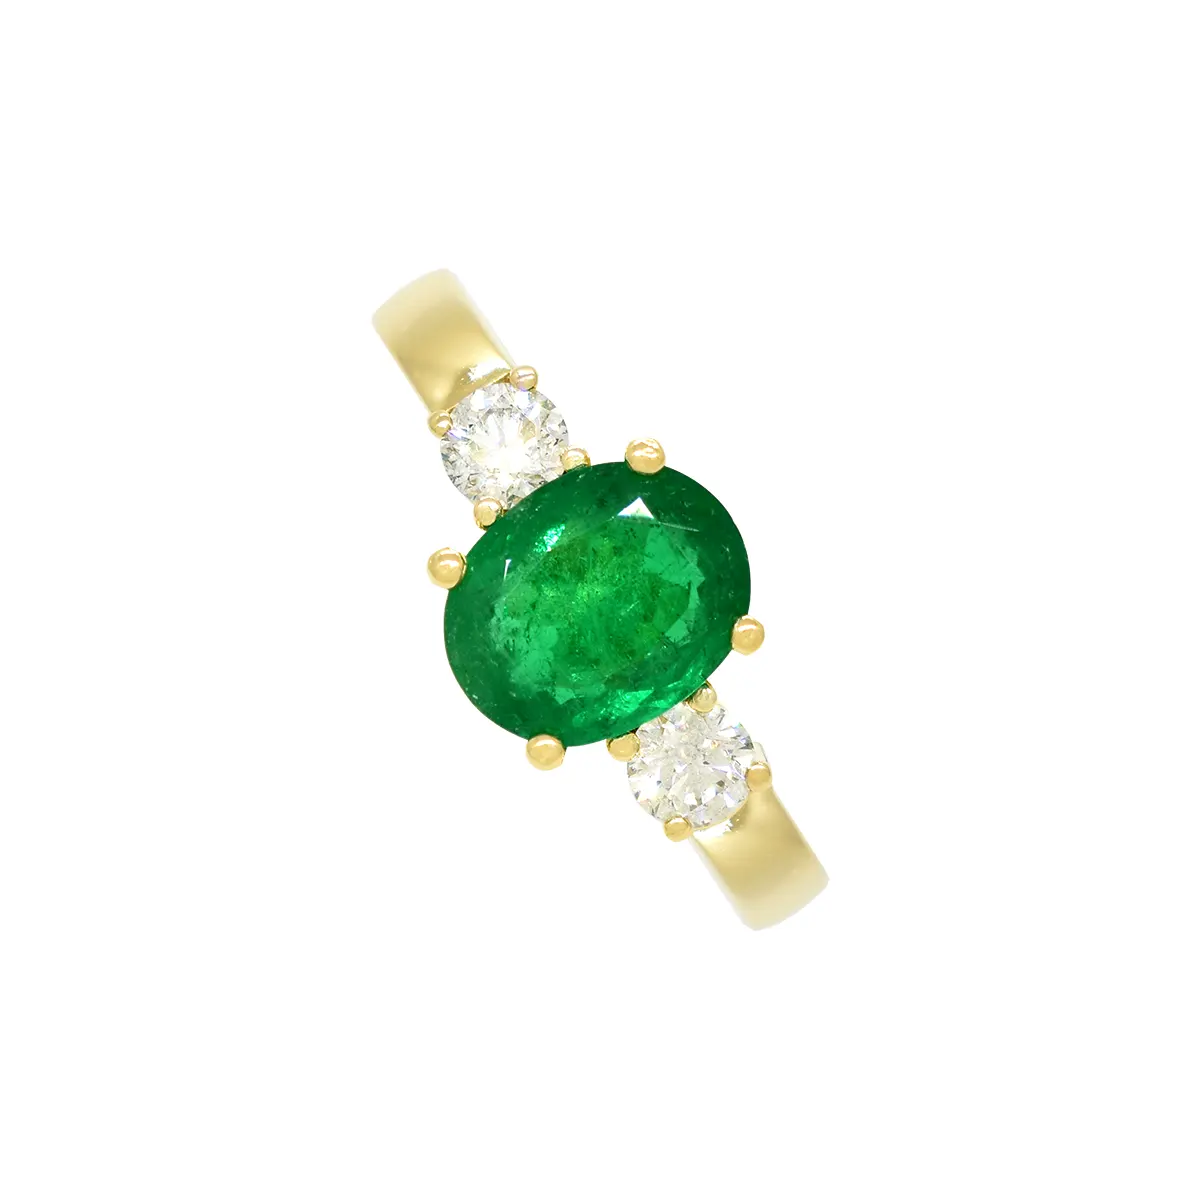 In this ring, two round-cut diamonds are flanking the emerald on each side. These diamonds are carefully chosen for their exceptional brilliance and fire